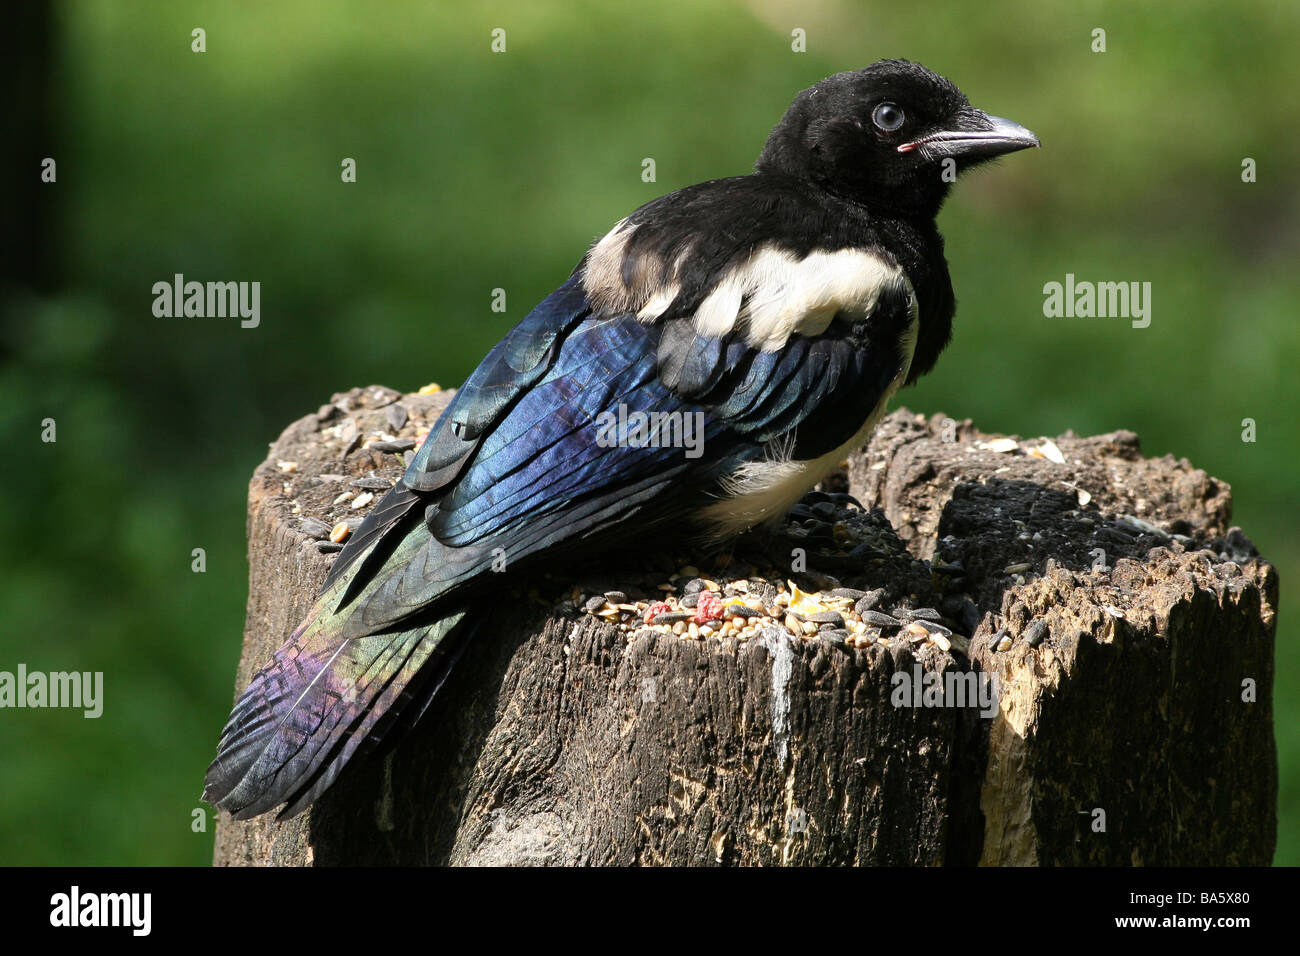 Black-billed Magpie Pica pica In Sunlight Showing Iridescent Plumage Stock Photo